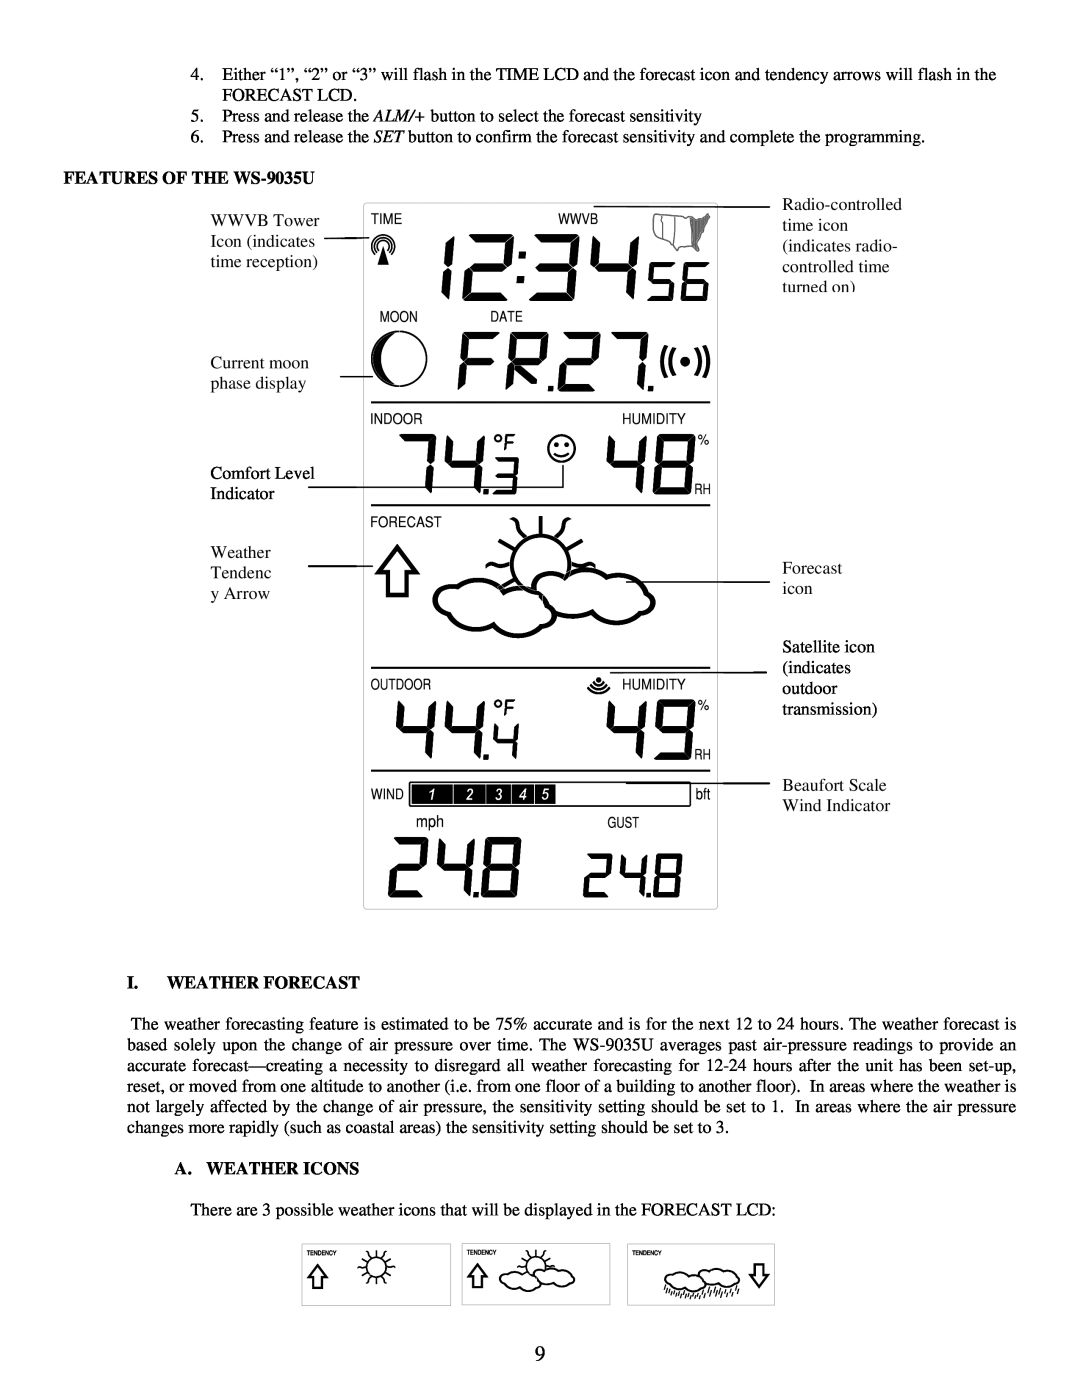 La Crosse Technology WS-9035TWC instruction manual FEATURES OF THE WS-9035U, I.Weather Forecast, A. Weather Icons 